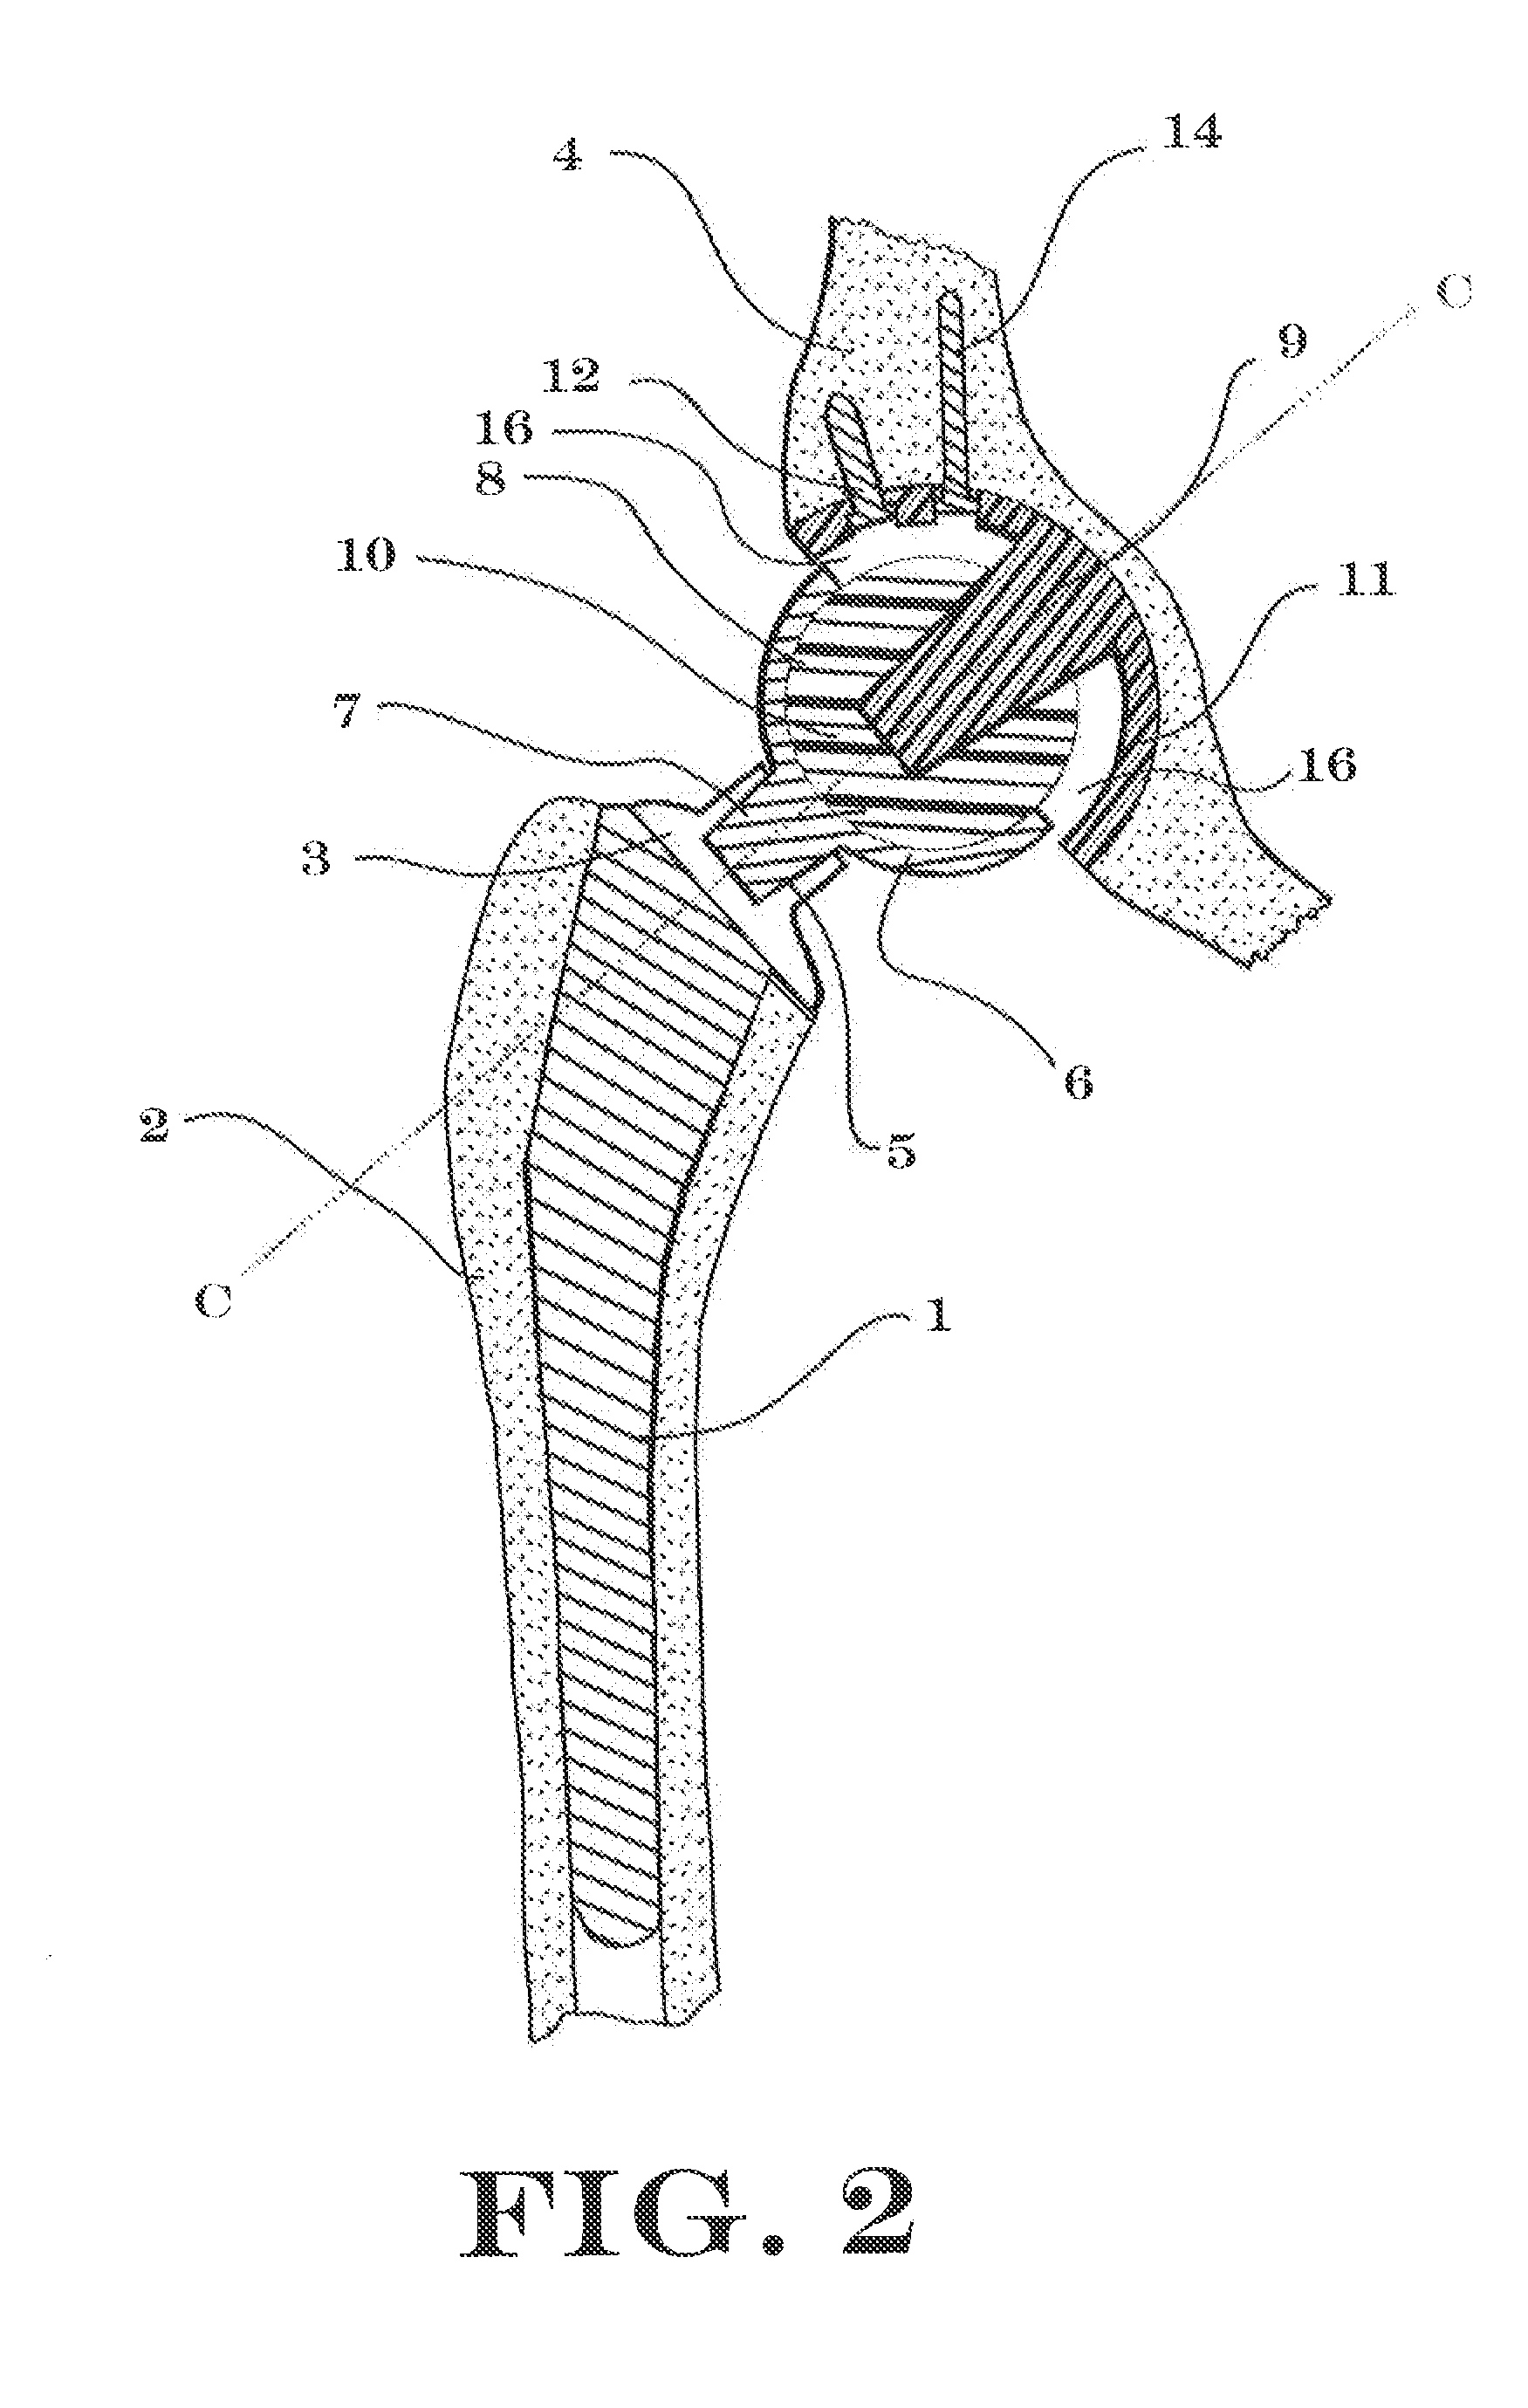 Interlocking Reverse Hip and Revision Prosthesis